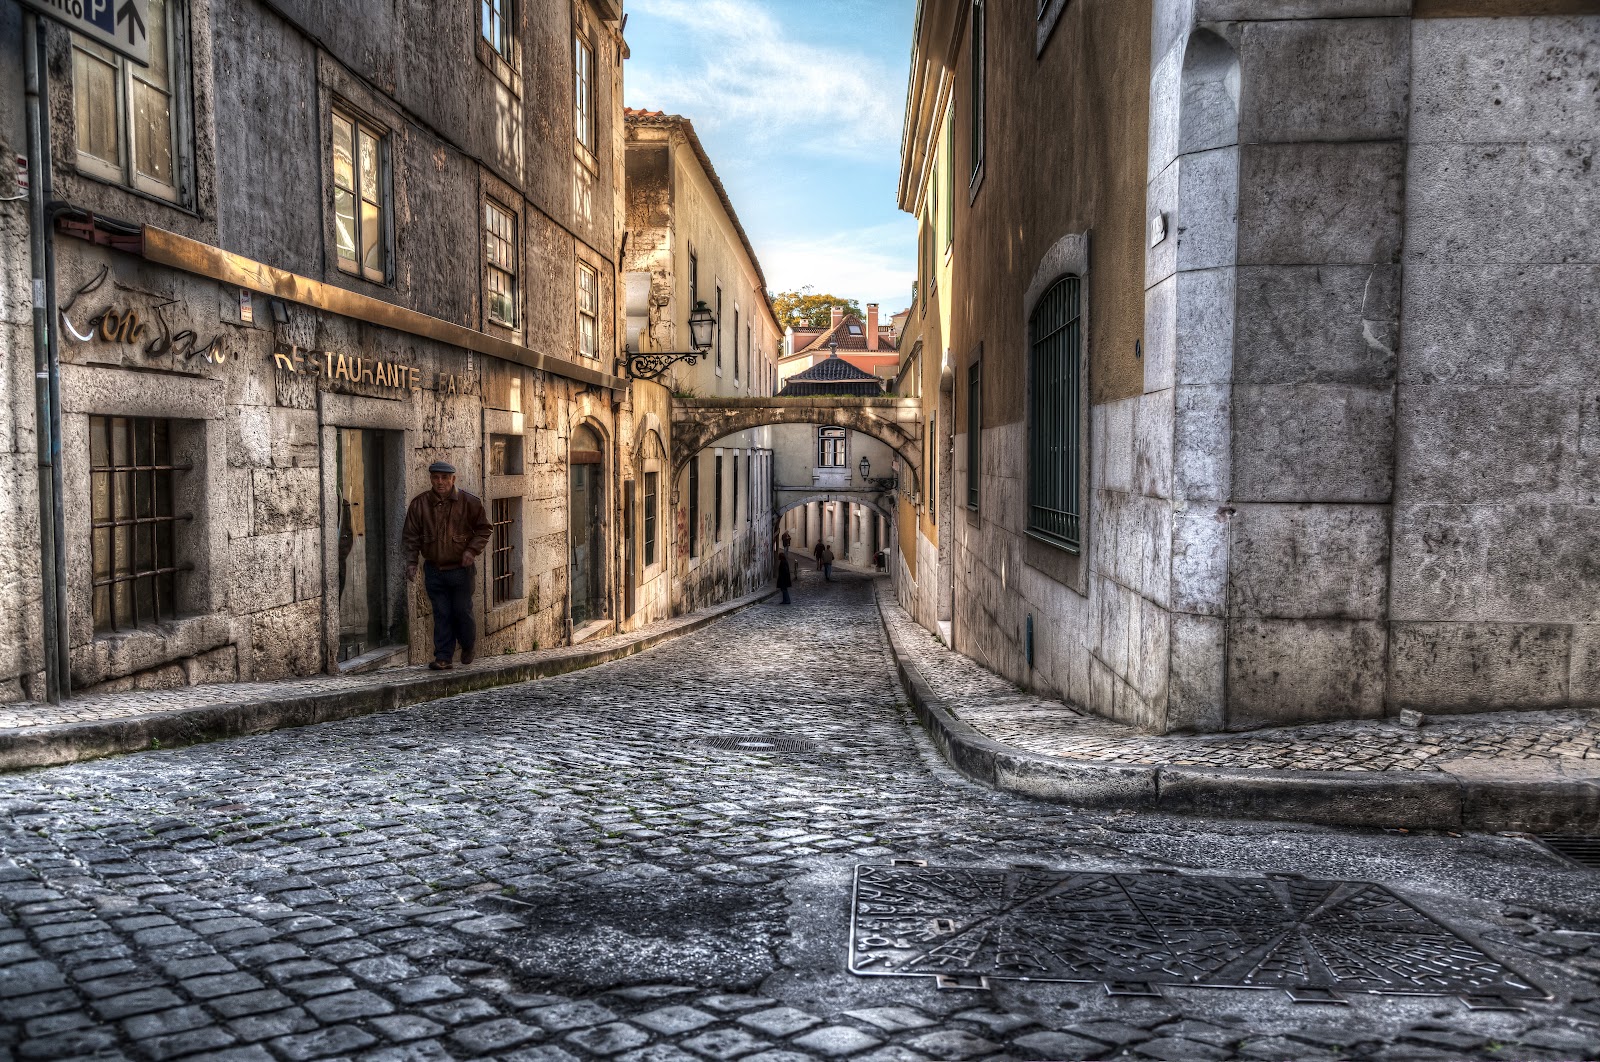 Another Lisbon street and new wallpaper ~ HDR photographer